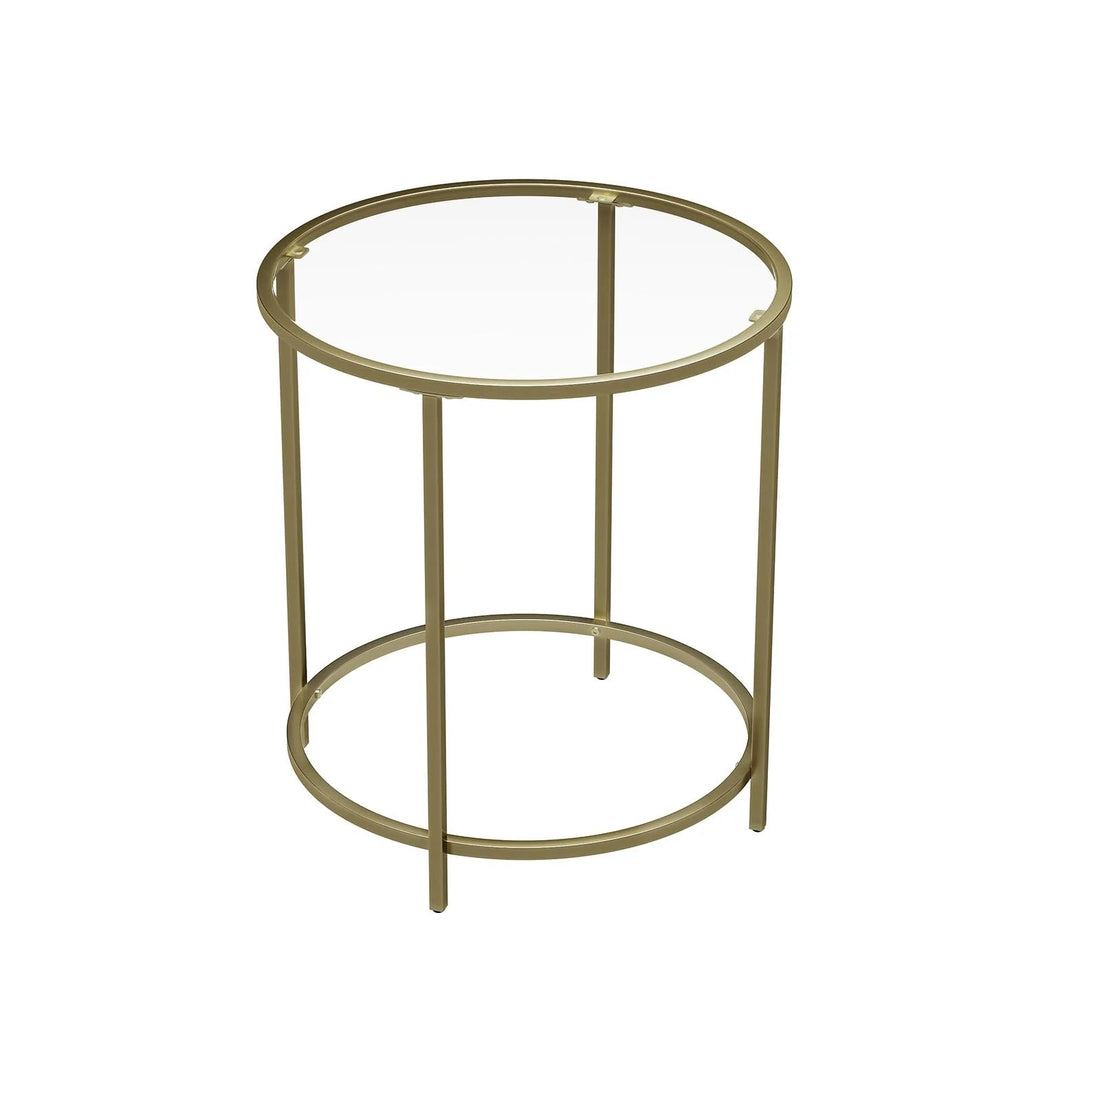 Round Side Table with Tempered Glass Top